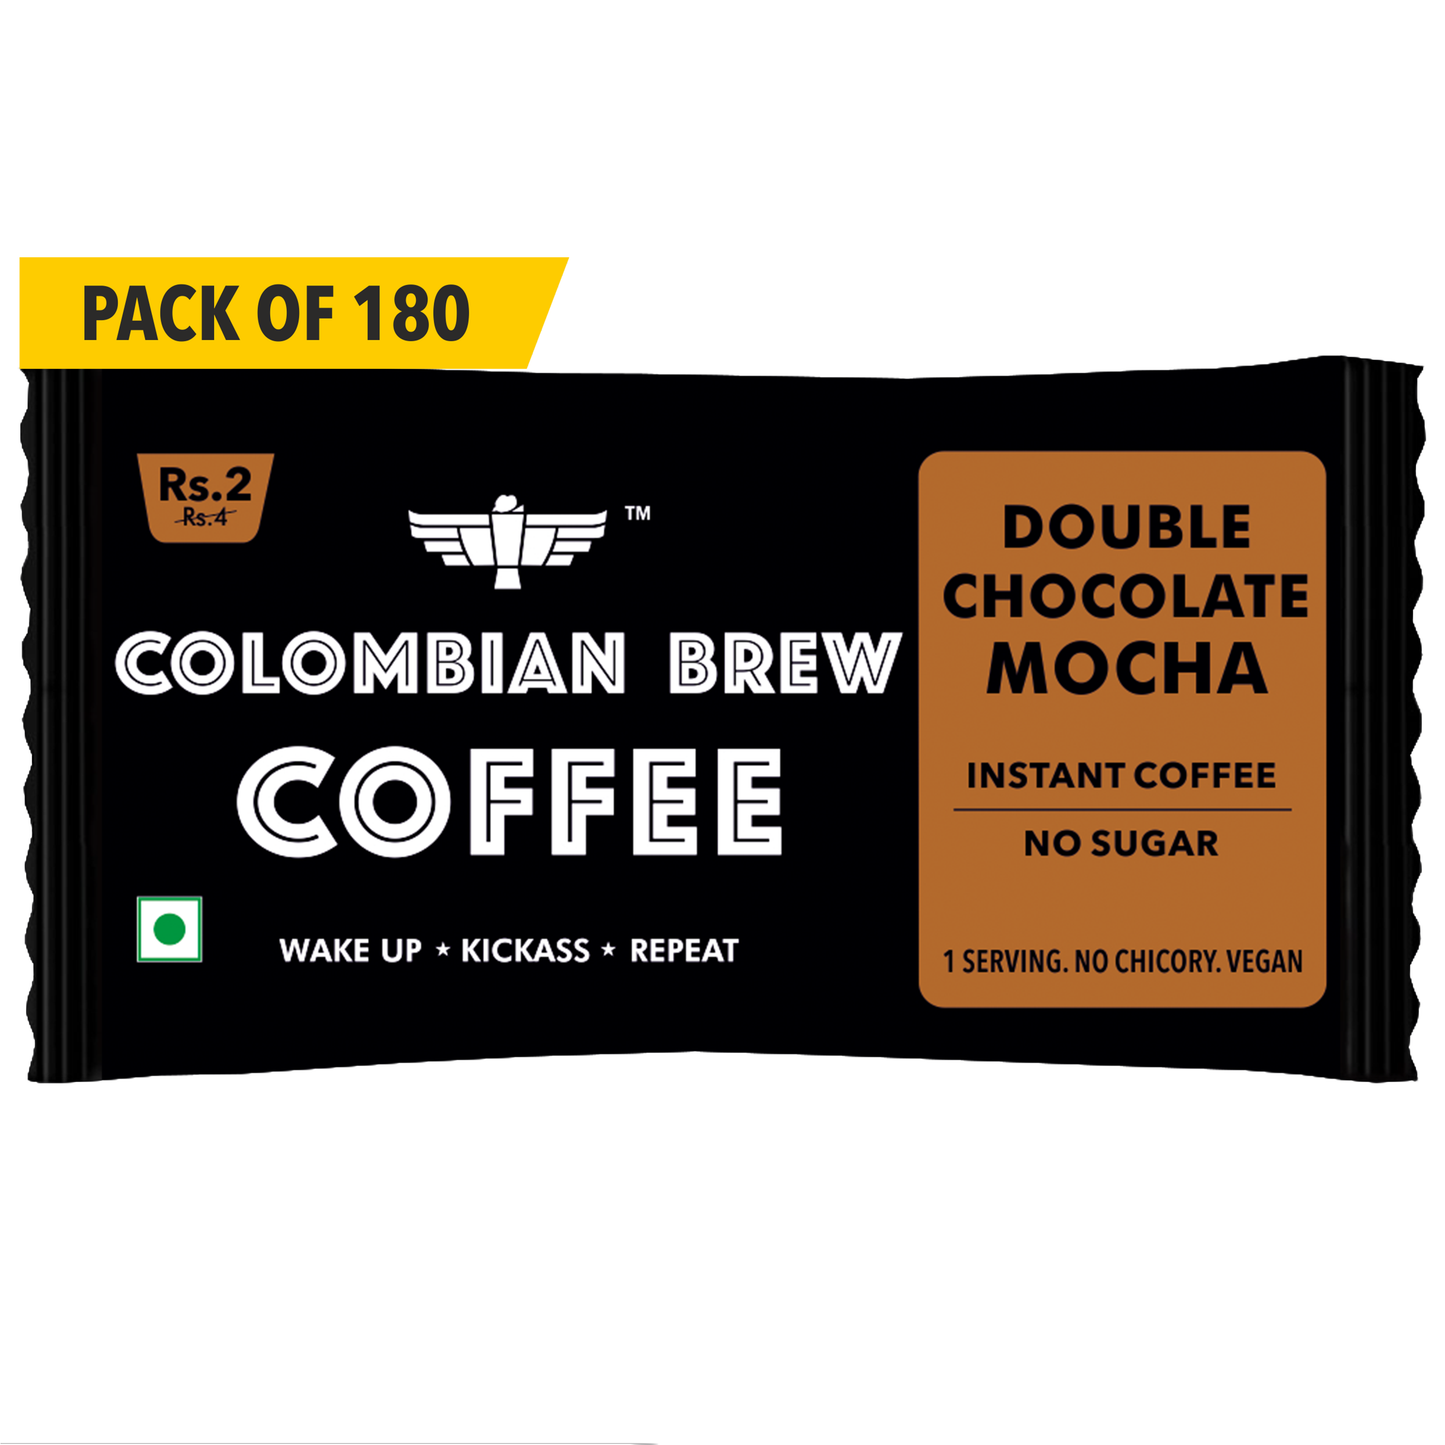 Colombian Brew Double Chocolate Mocha Instant Coffee Powder Sachets, Pack of 180 